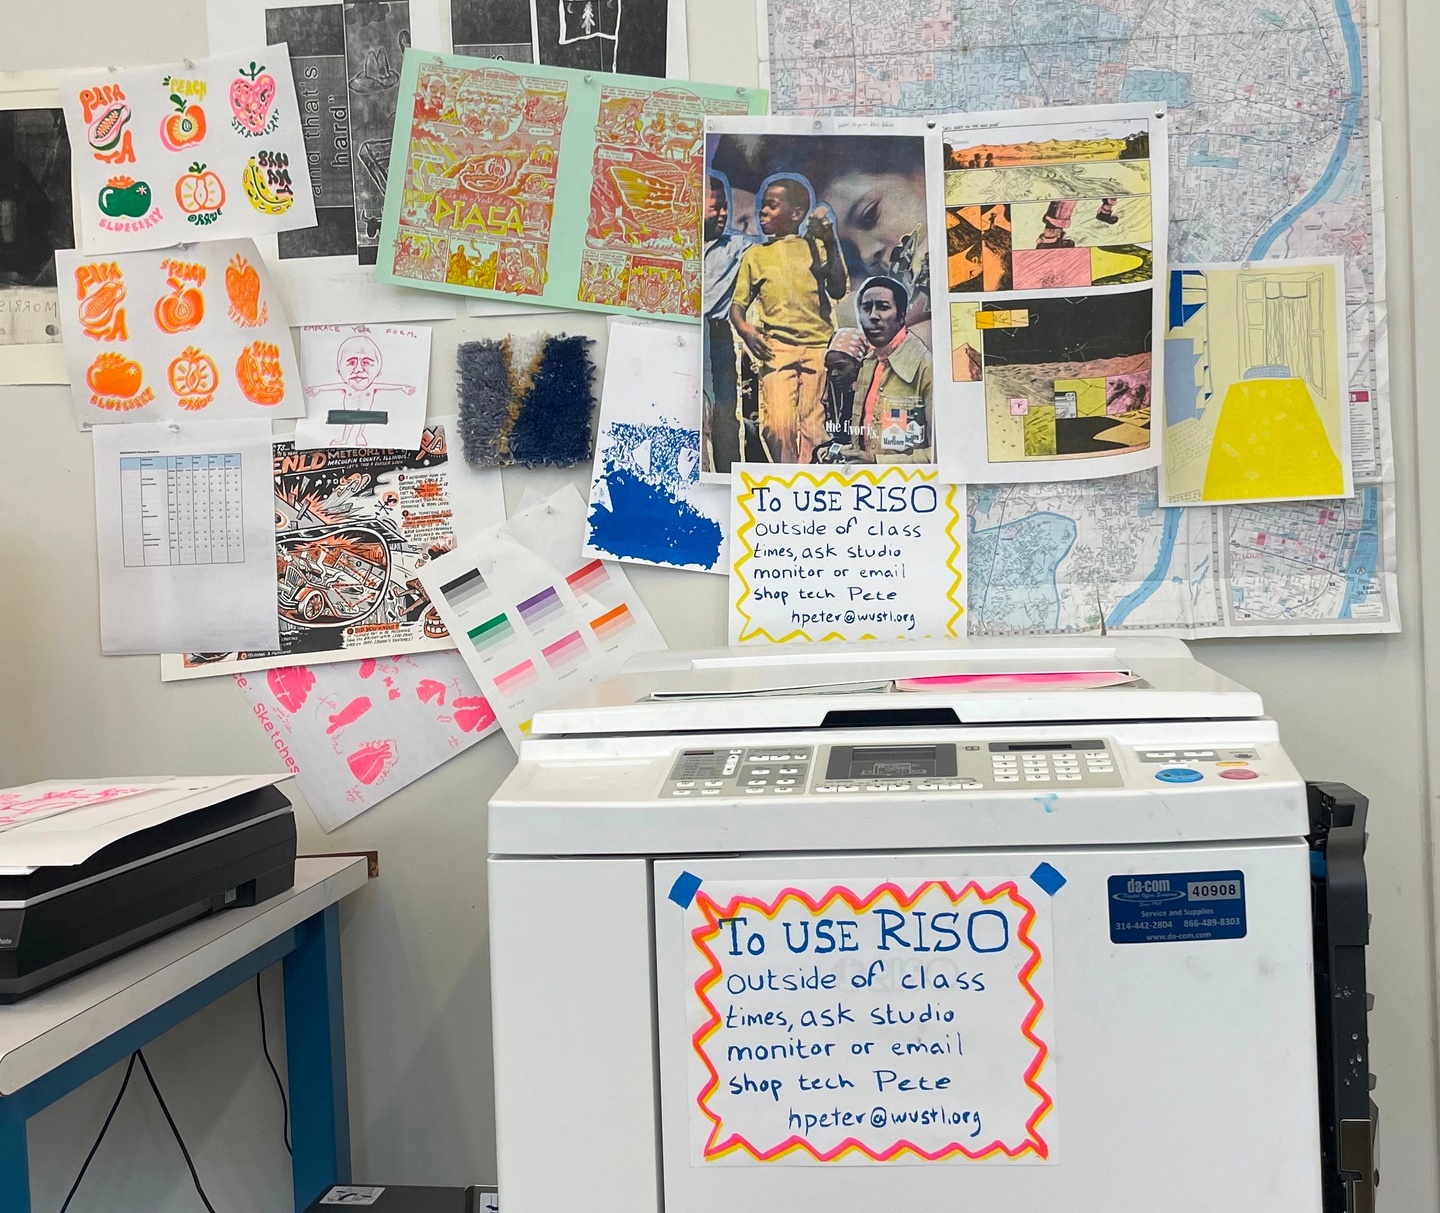 Photo of the risograph printer in the printmaking studio. The wall behind is decorated with various traditional prints including risograph